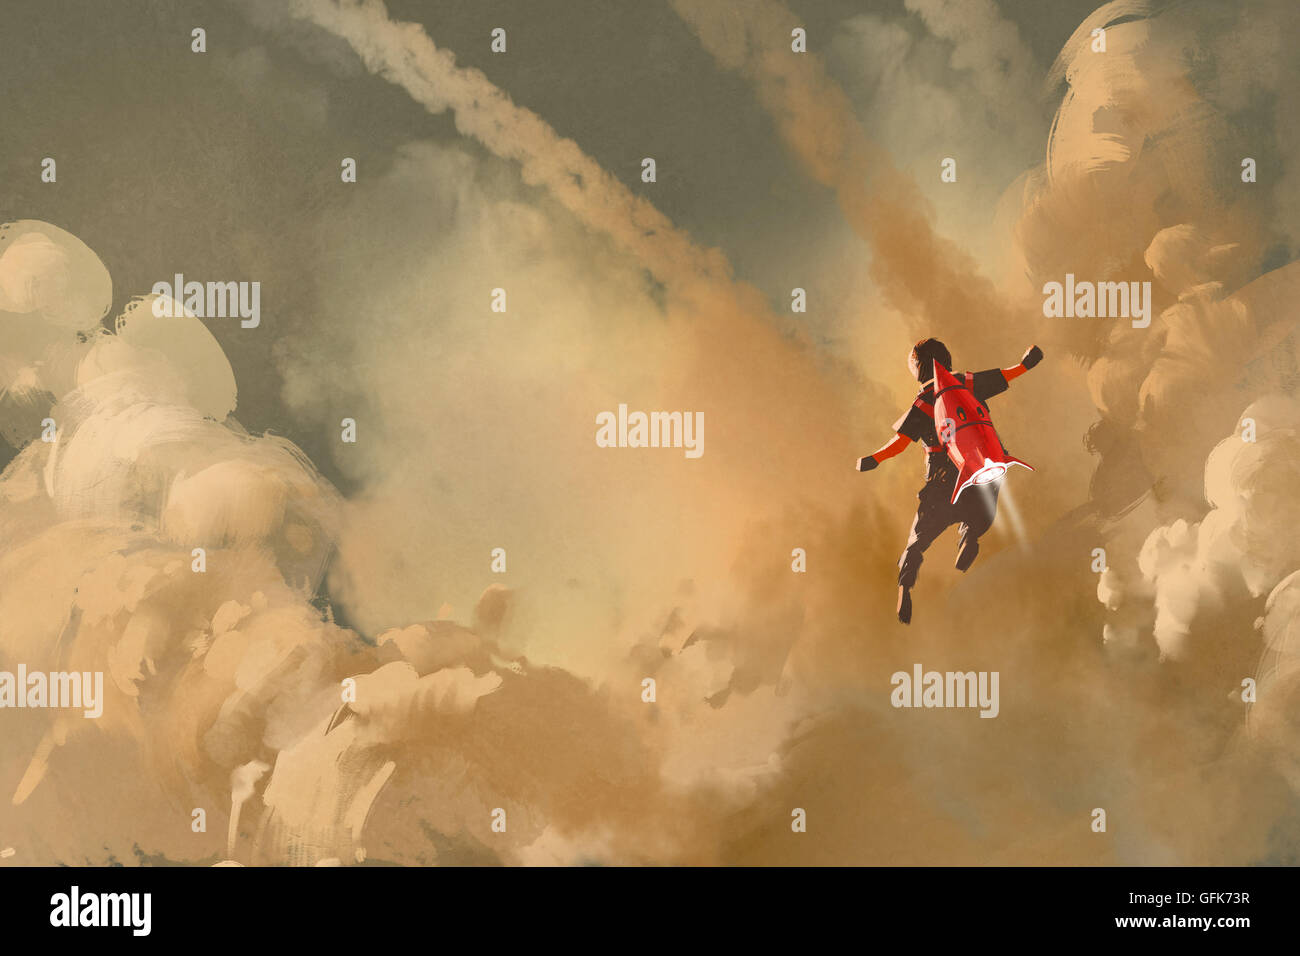 boy flying in the cloudy sky with jet pack rocket,illustration painting Stock Photo